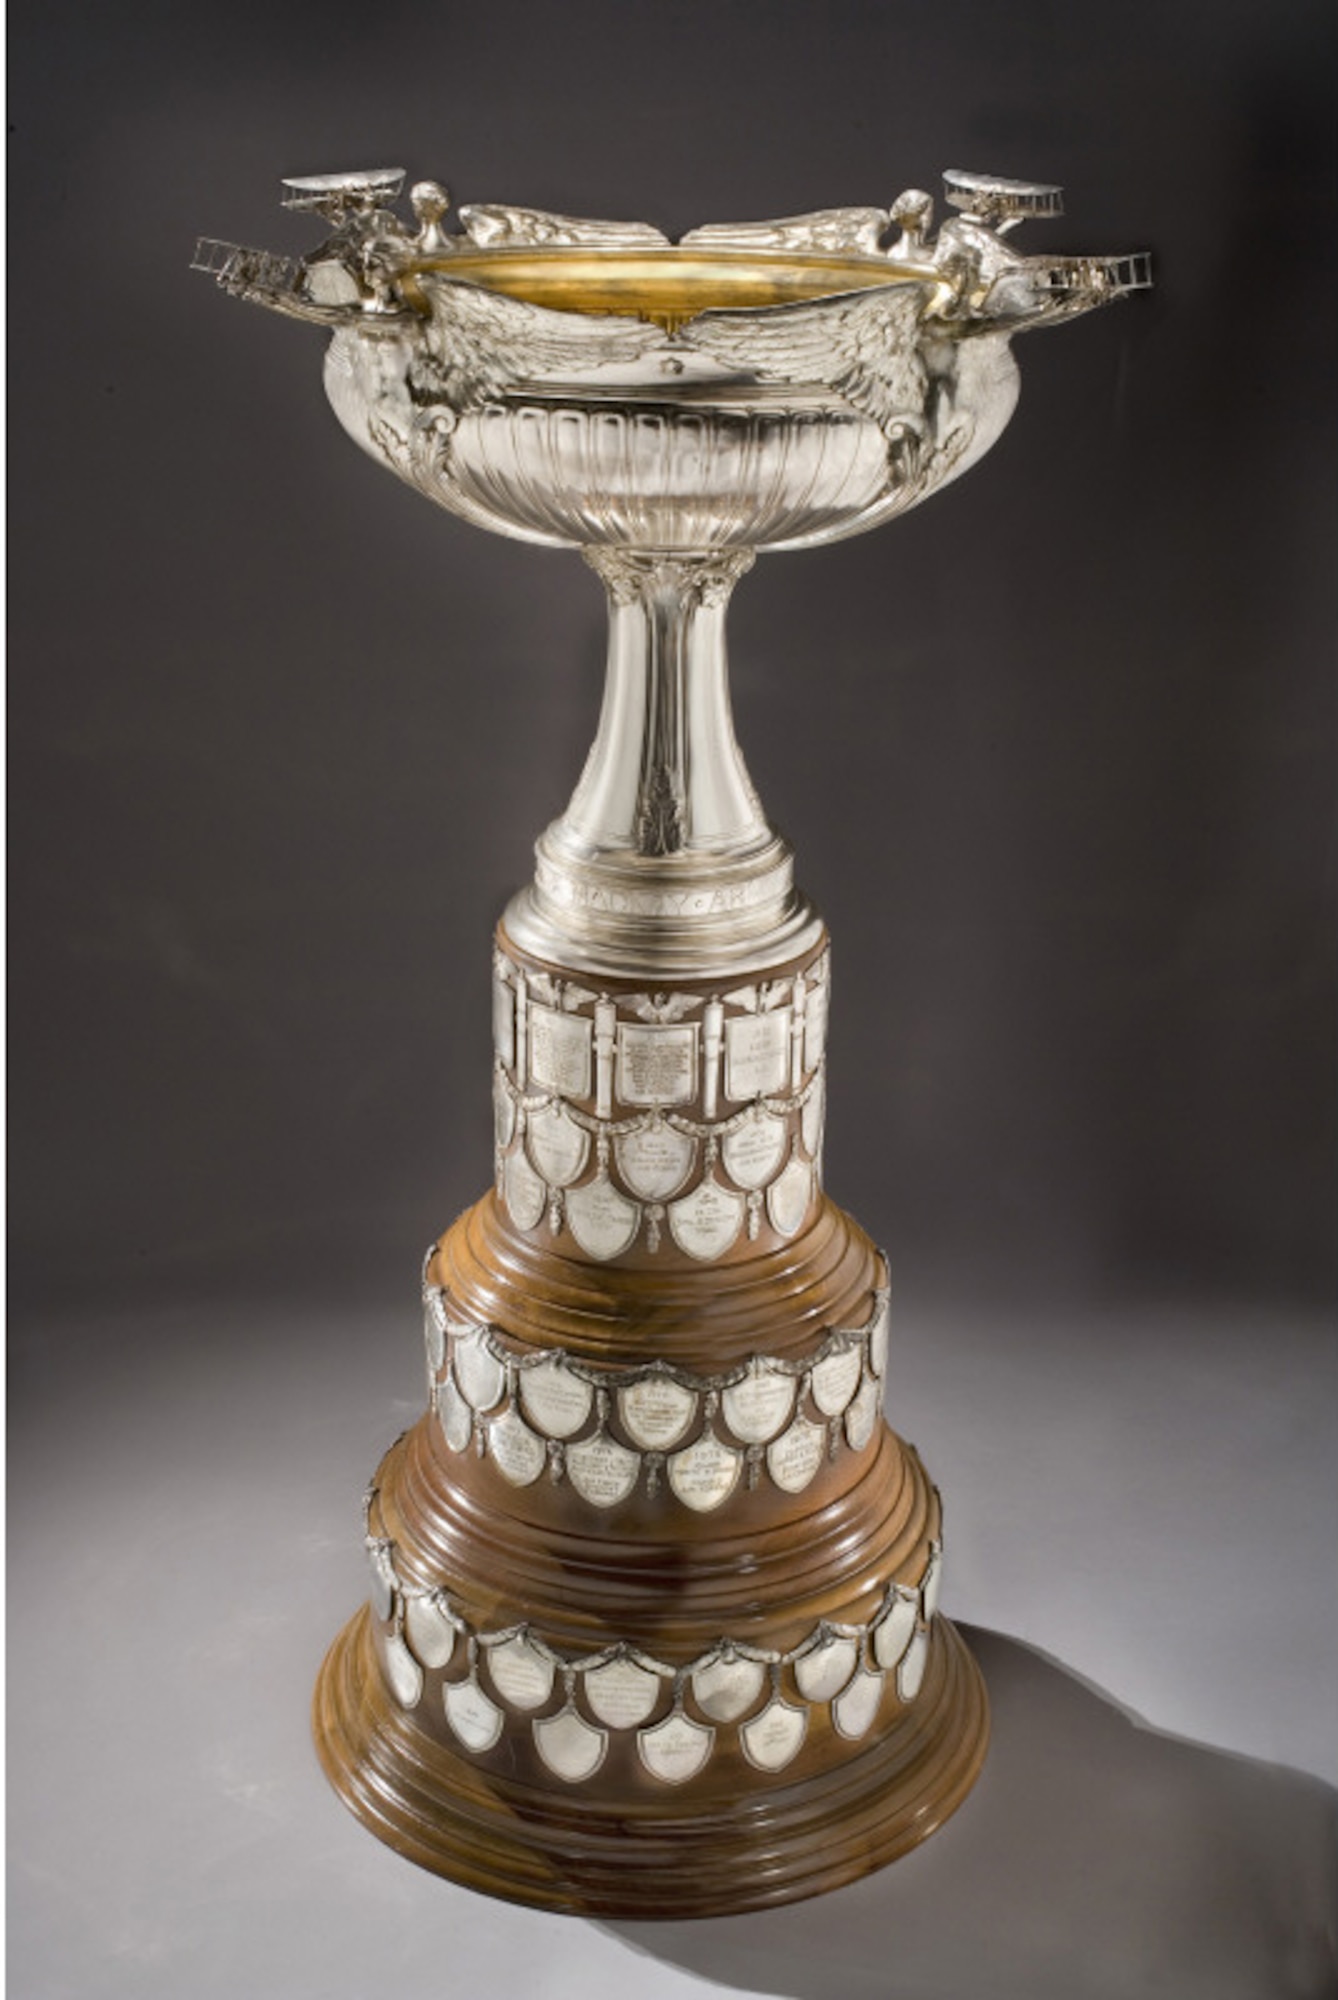 The Mackay Trophy, manufactured by renowned American jeweler and design house Tiffany and Co. in 1911, stands 42” high and consists of a massive silver cup, lined in gold, with four winged angels holding Wright military flyers, atop a three-tiered mahogany base. The base is adorned with silver medallions engraved with the names of legendary U.S. Air Force Airmen and organizations. (Courtesy photo)